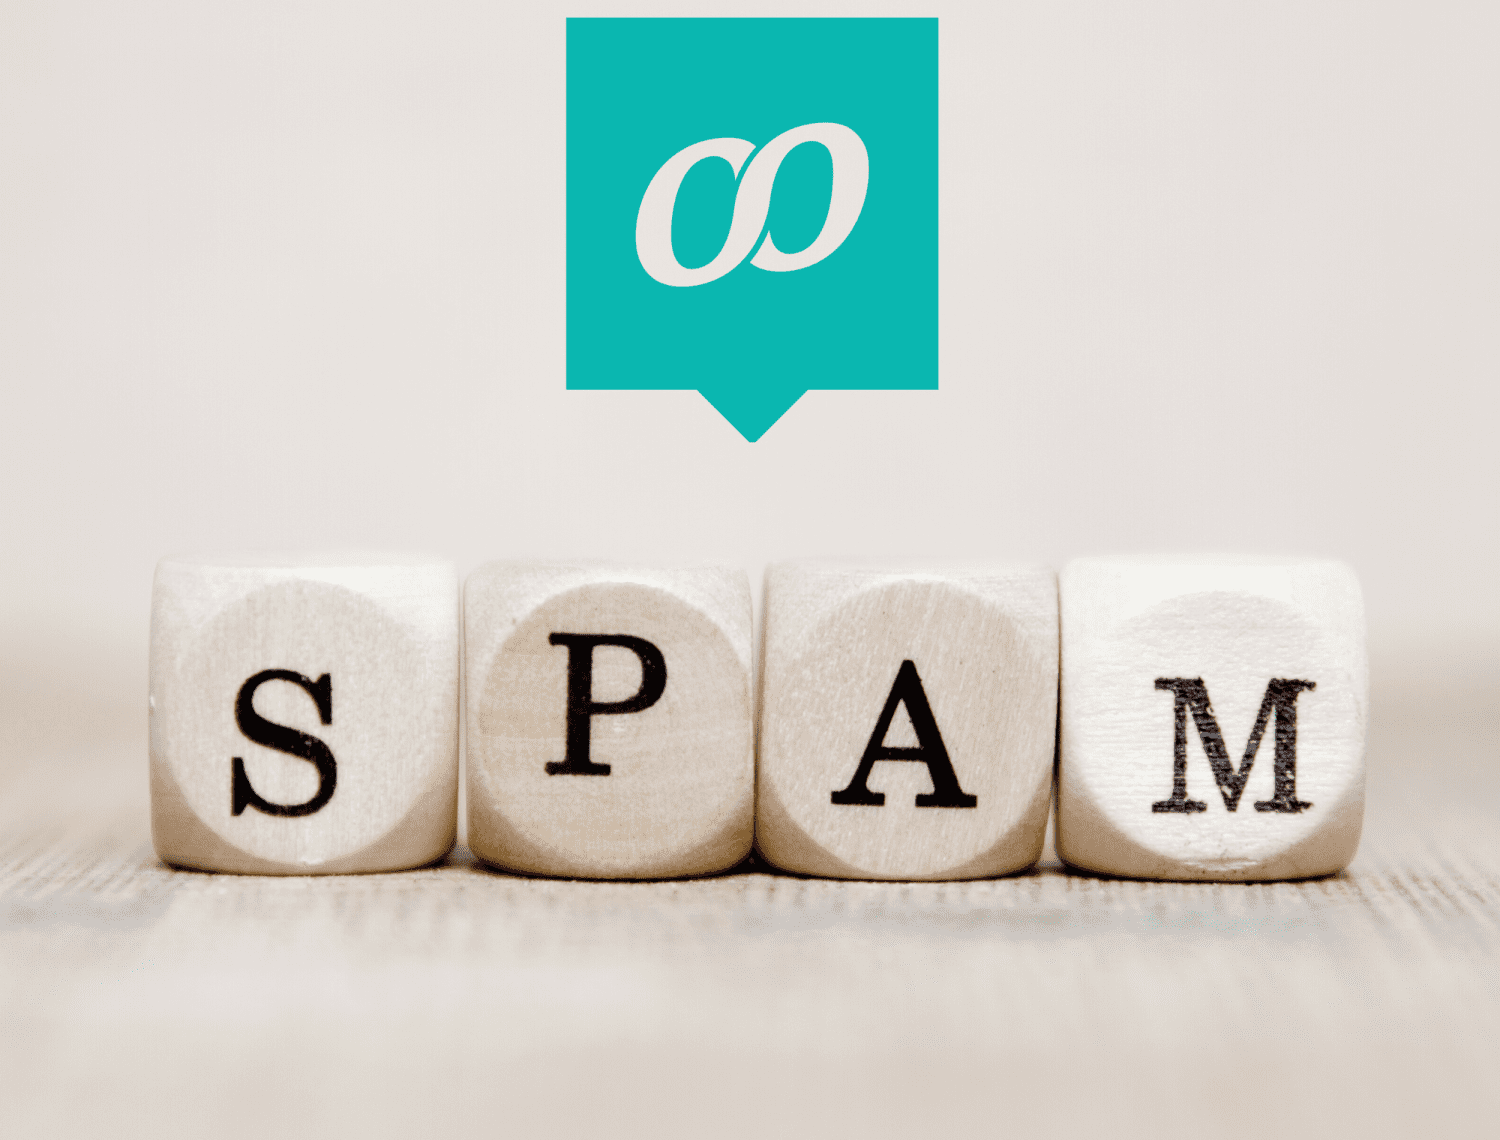 How does infoodle help you reduce Spam?